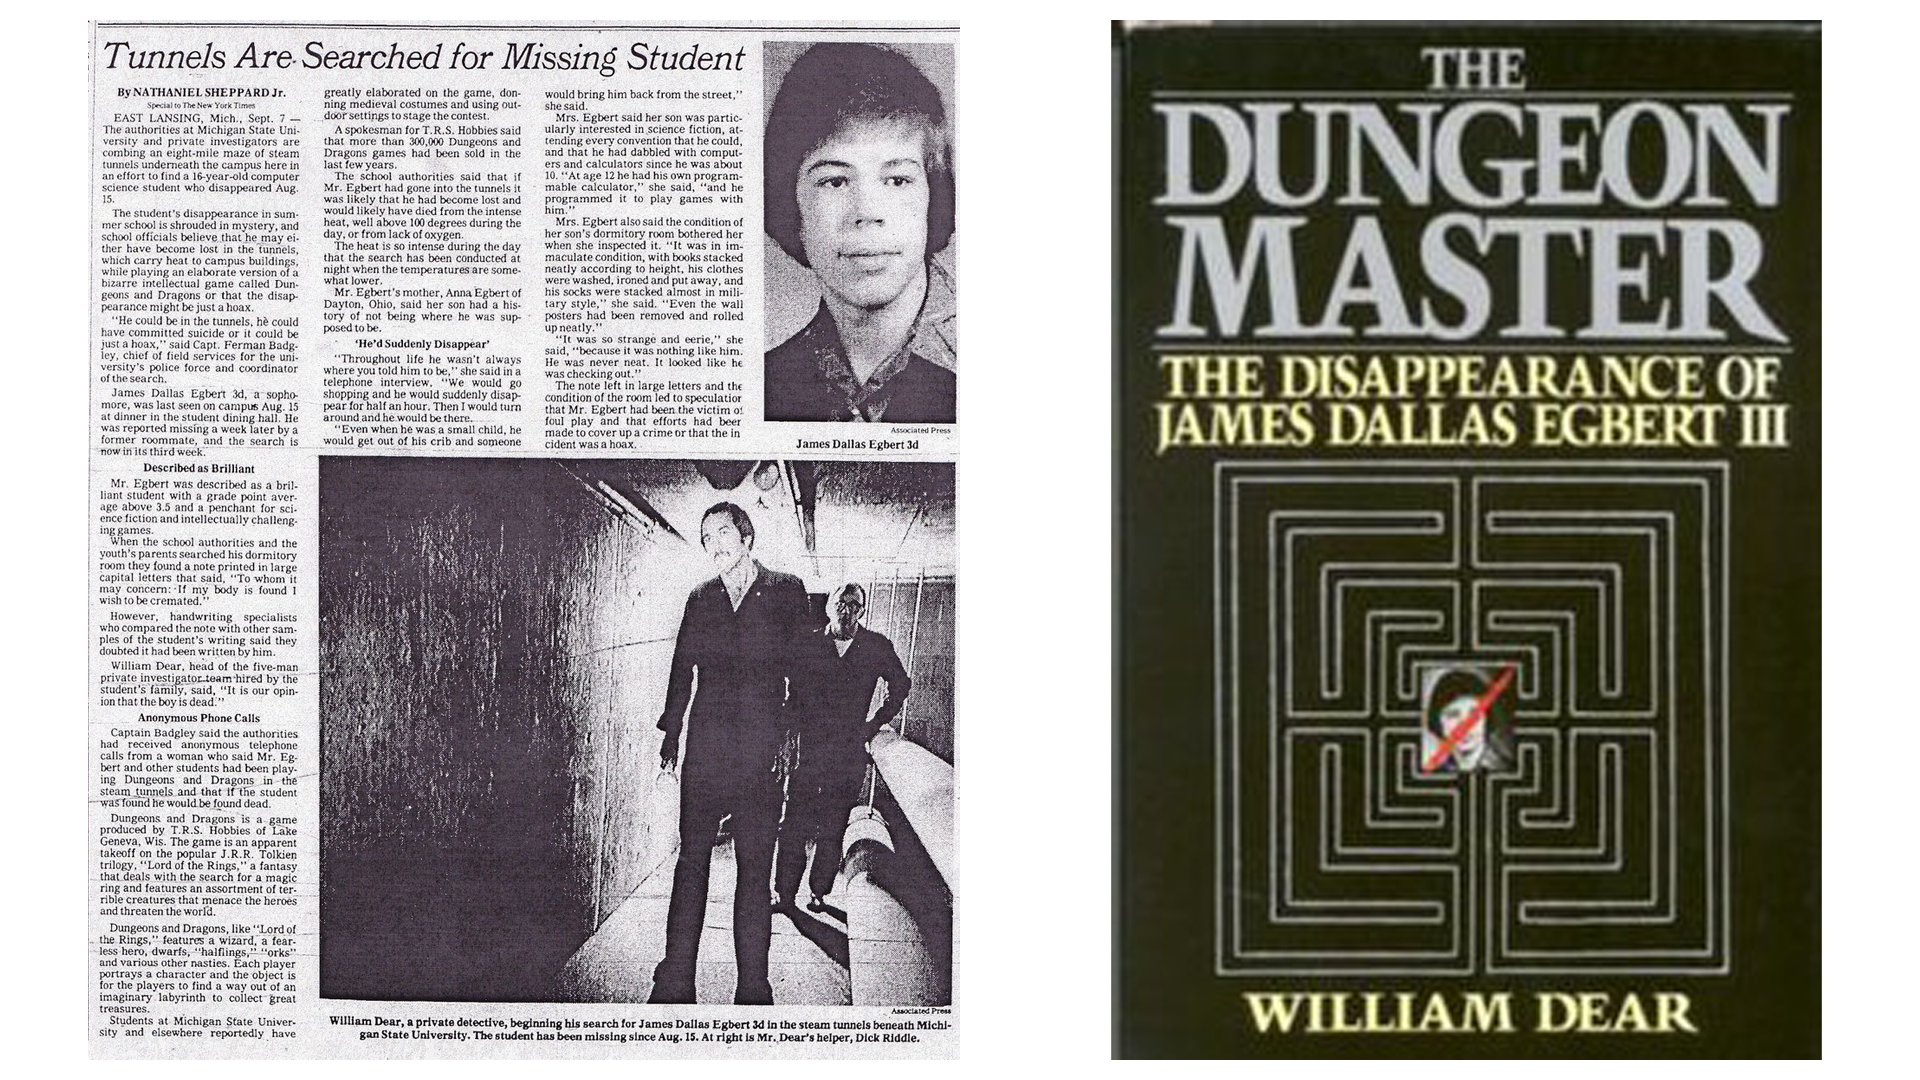 Images of a newspaper clipping for Dallas Egbert's disappearance and the front cover of the Dungeon Master book